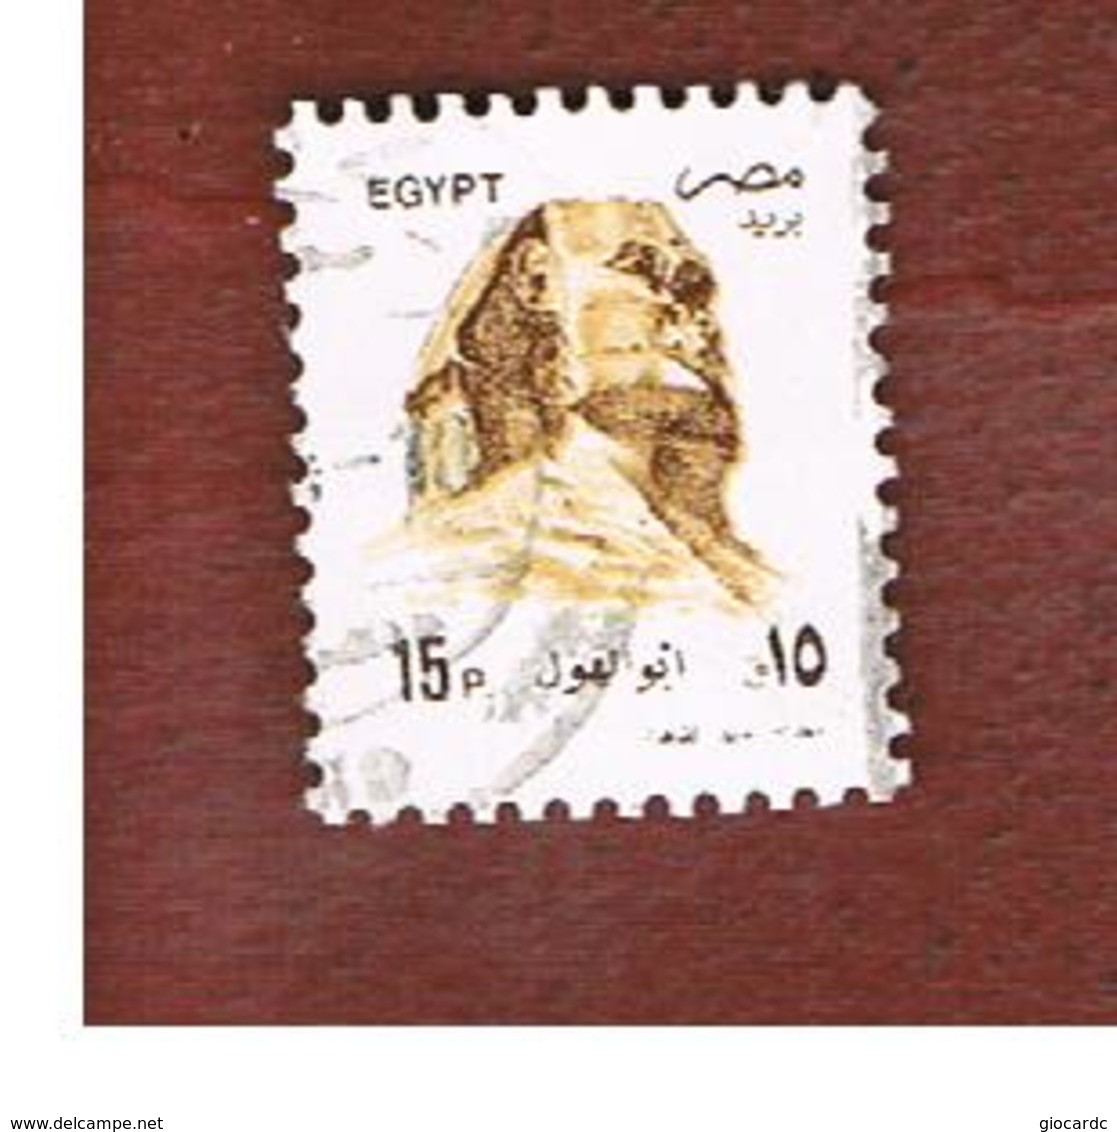 EGITTO (EGYPT) - SG 1917 - 1993 SPHINX (25X30)  - USED ° - Used Stamps